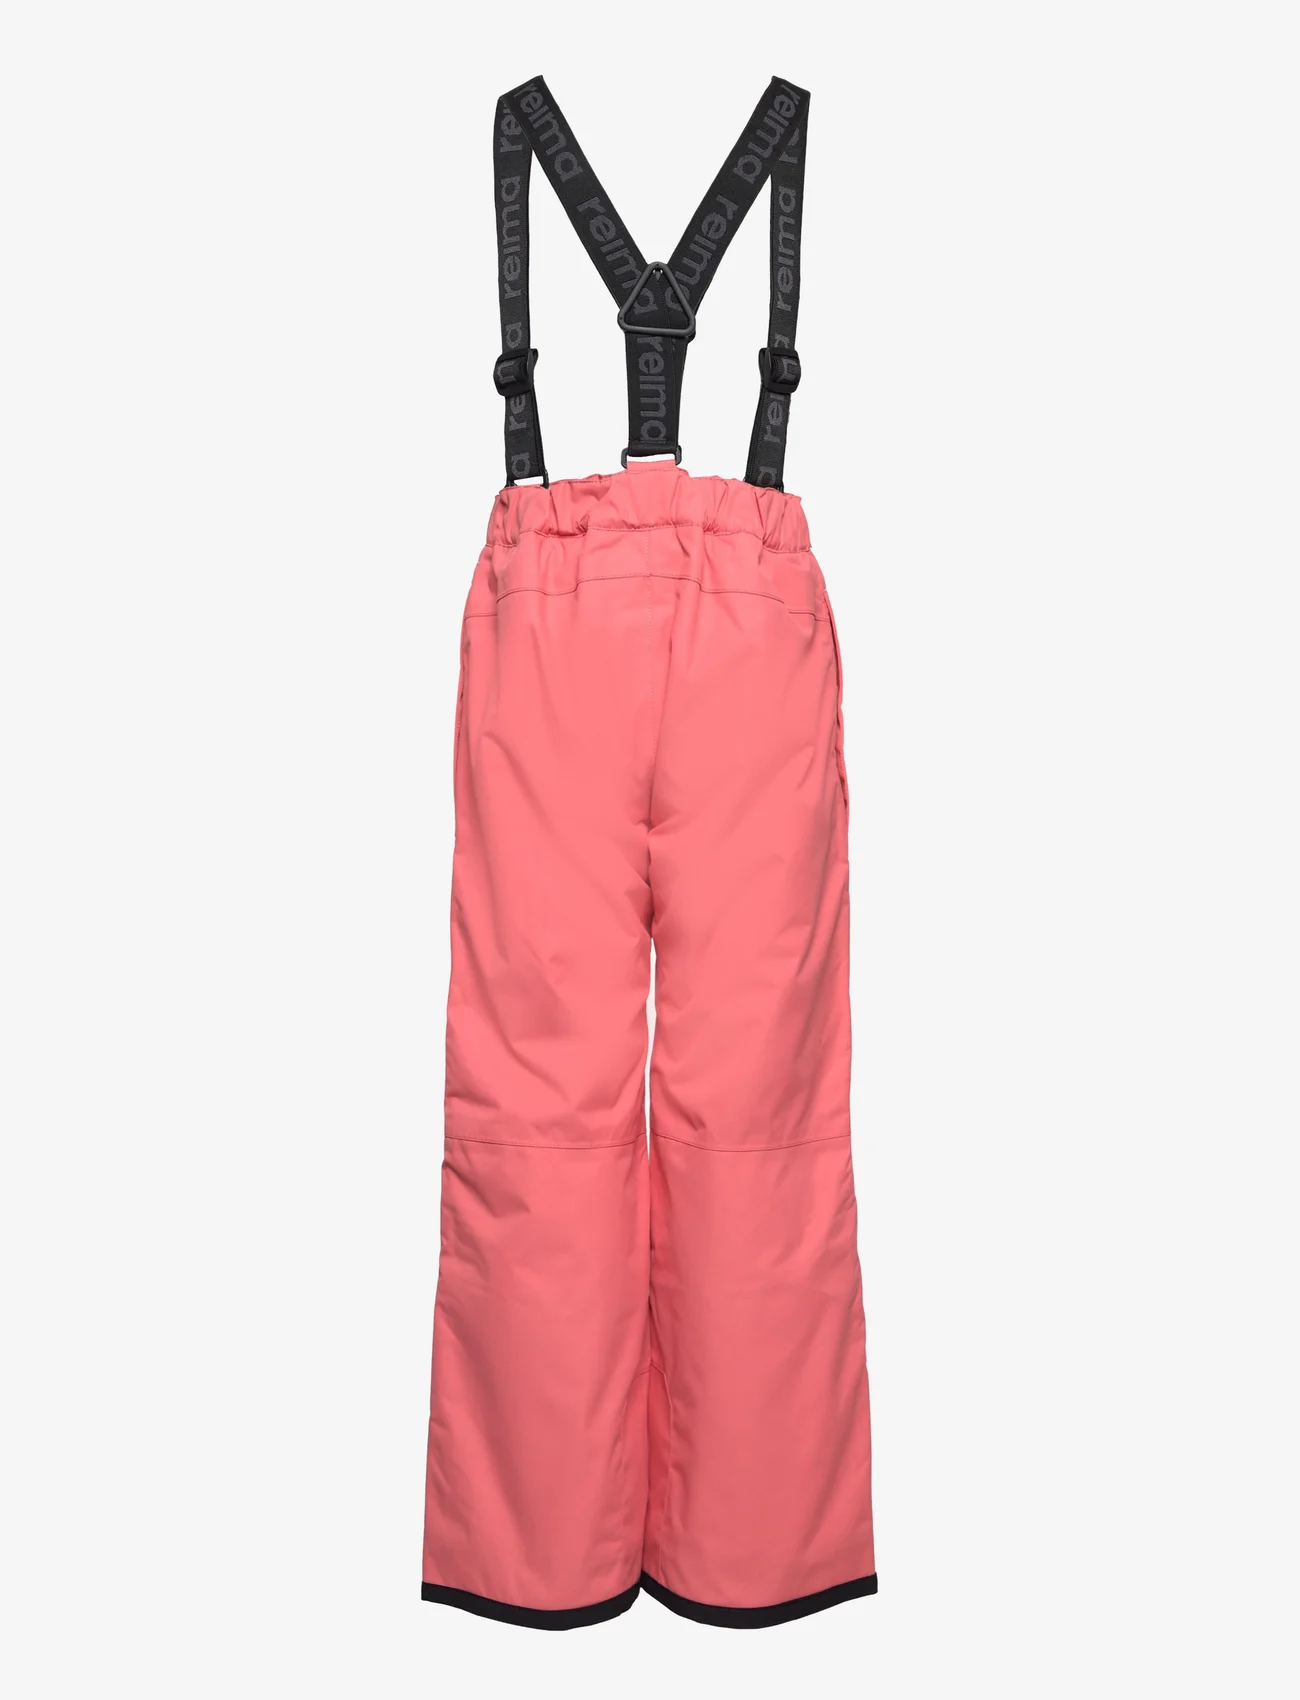 Reima - Kids' winter trousers Proxima - bottoms - pink coral - 1